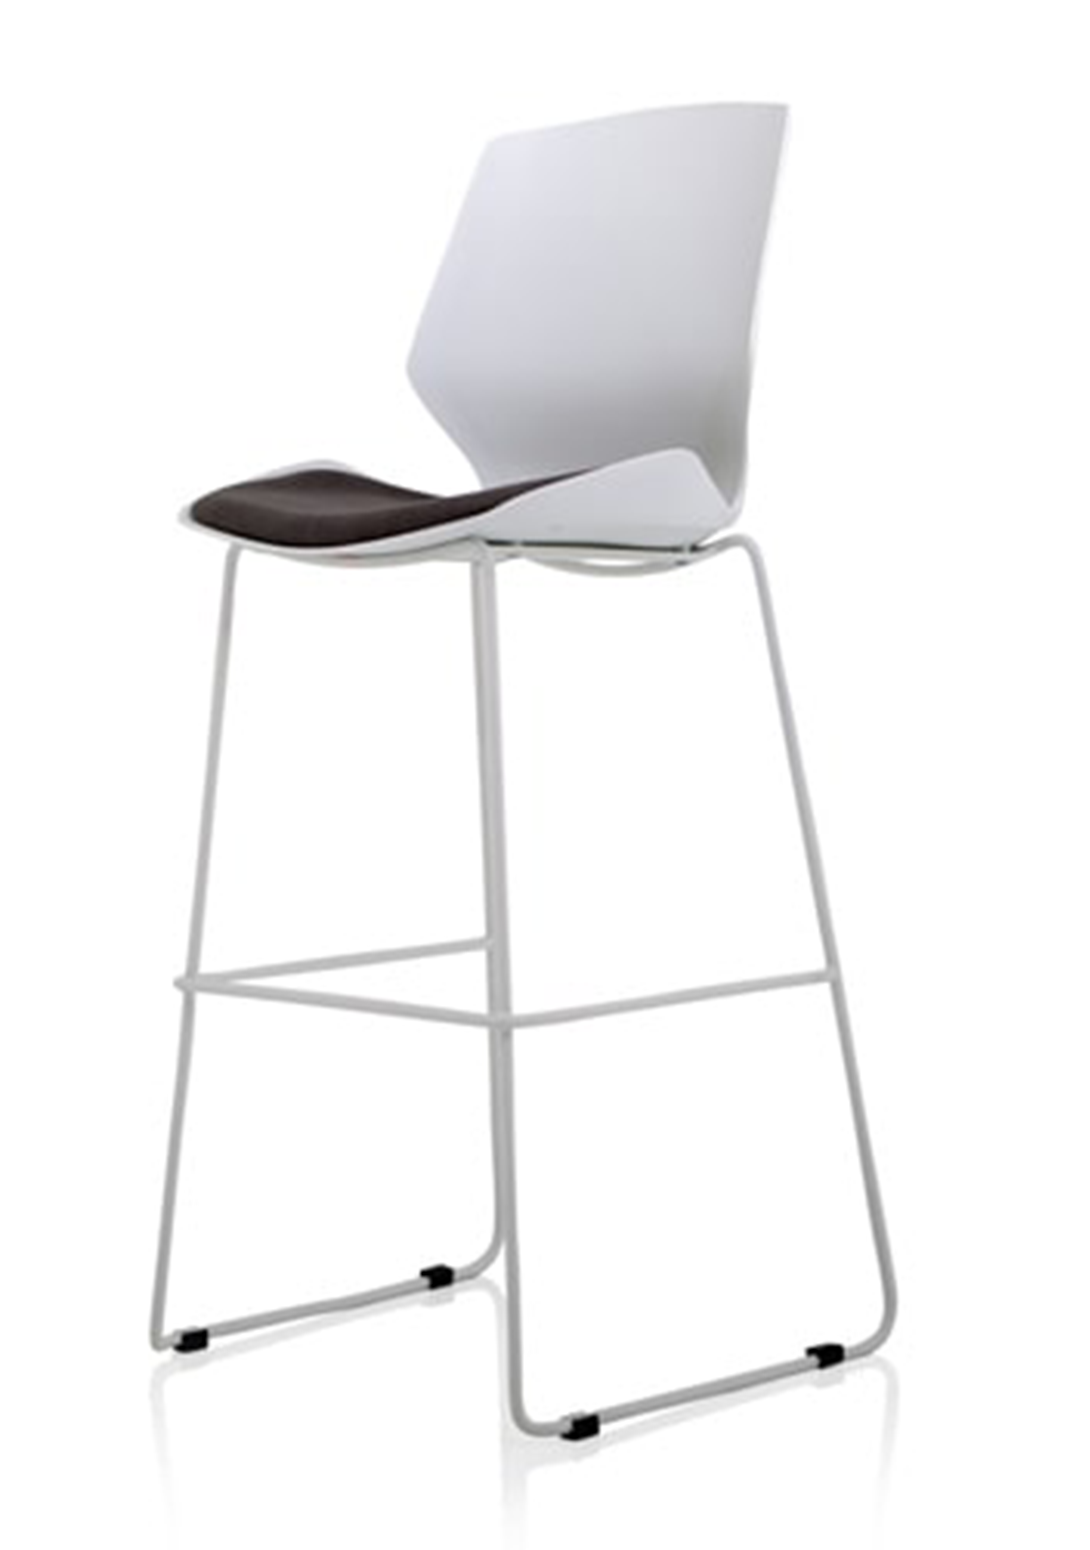 Florence White Frame Fabric Seat High Stool Chair